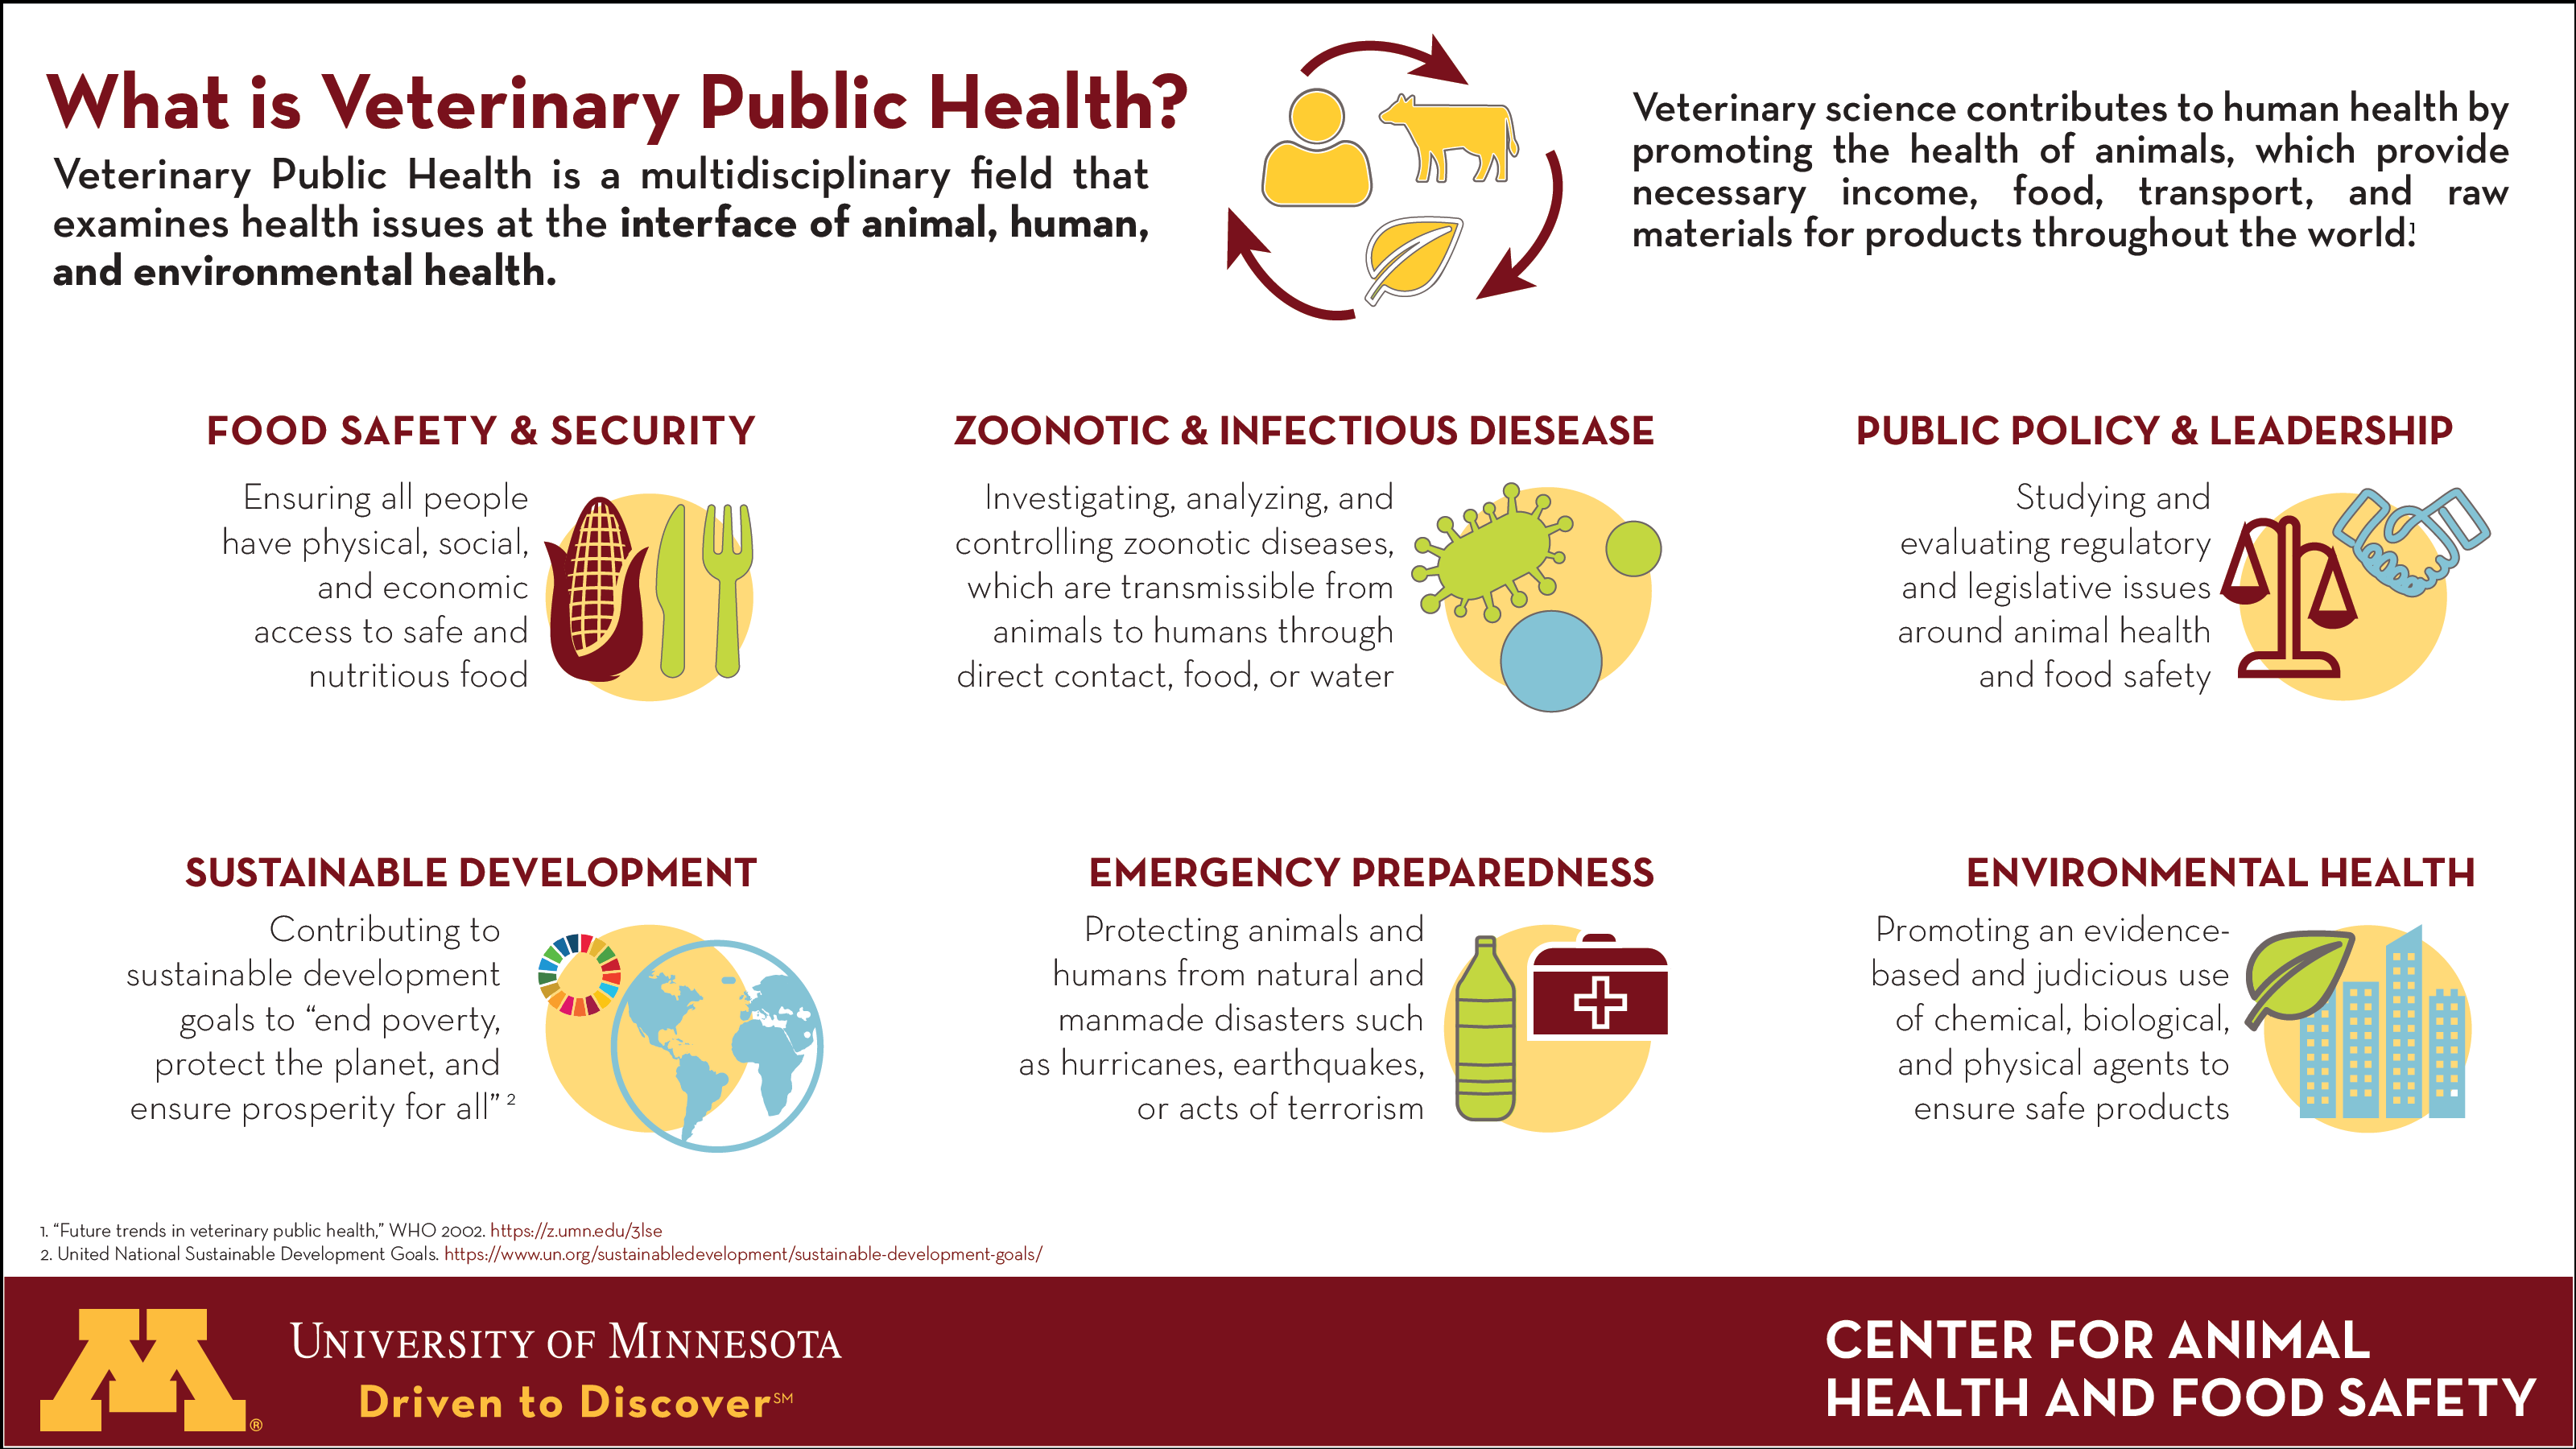 Infographic titled "What Is Veterinary Public Health?" Topics are food safety & security, zoonotic & infectious disease, public policy & leadership, sustainable development, emergency preparedness, and environmental health